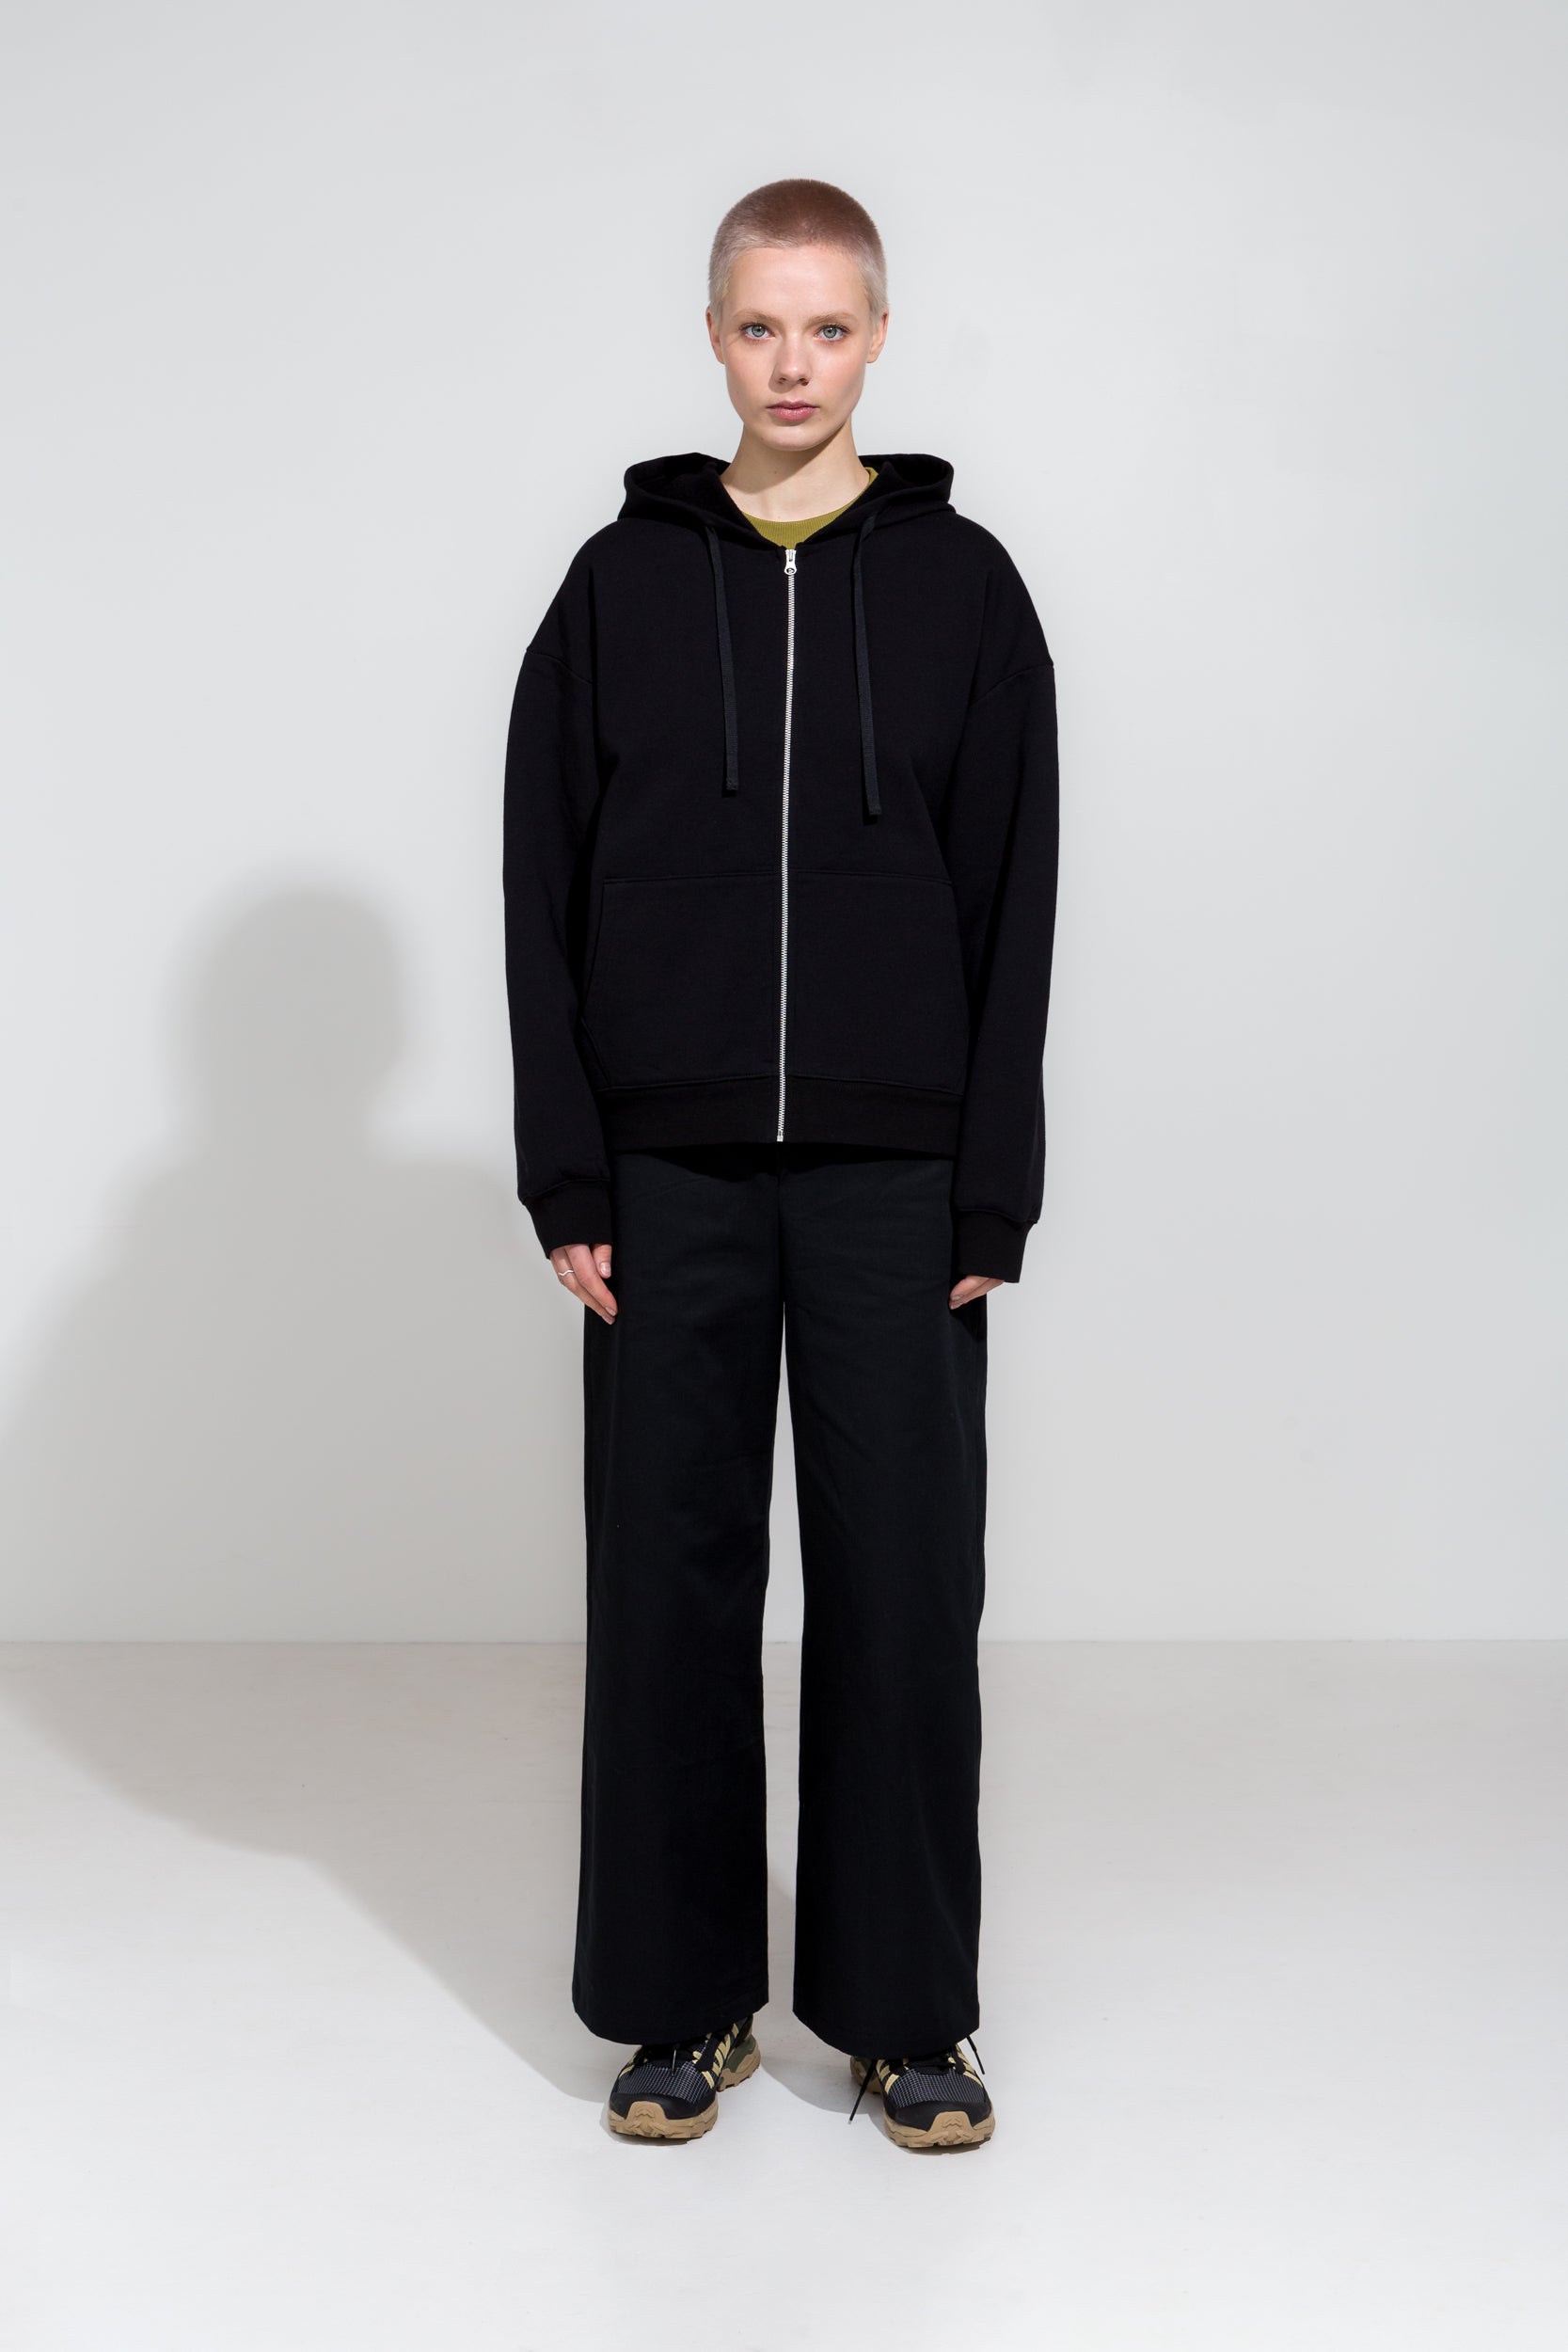 Black straight cut twill trousers and organic cotton hoodie jacket